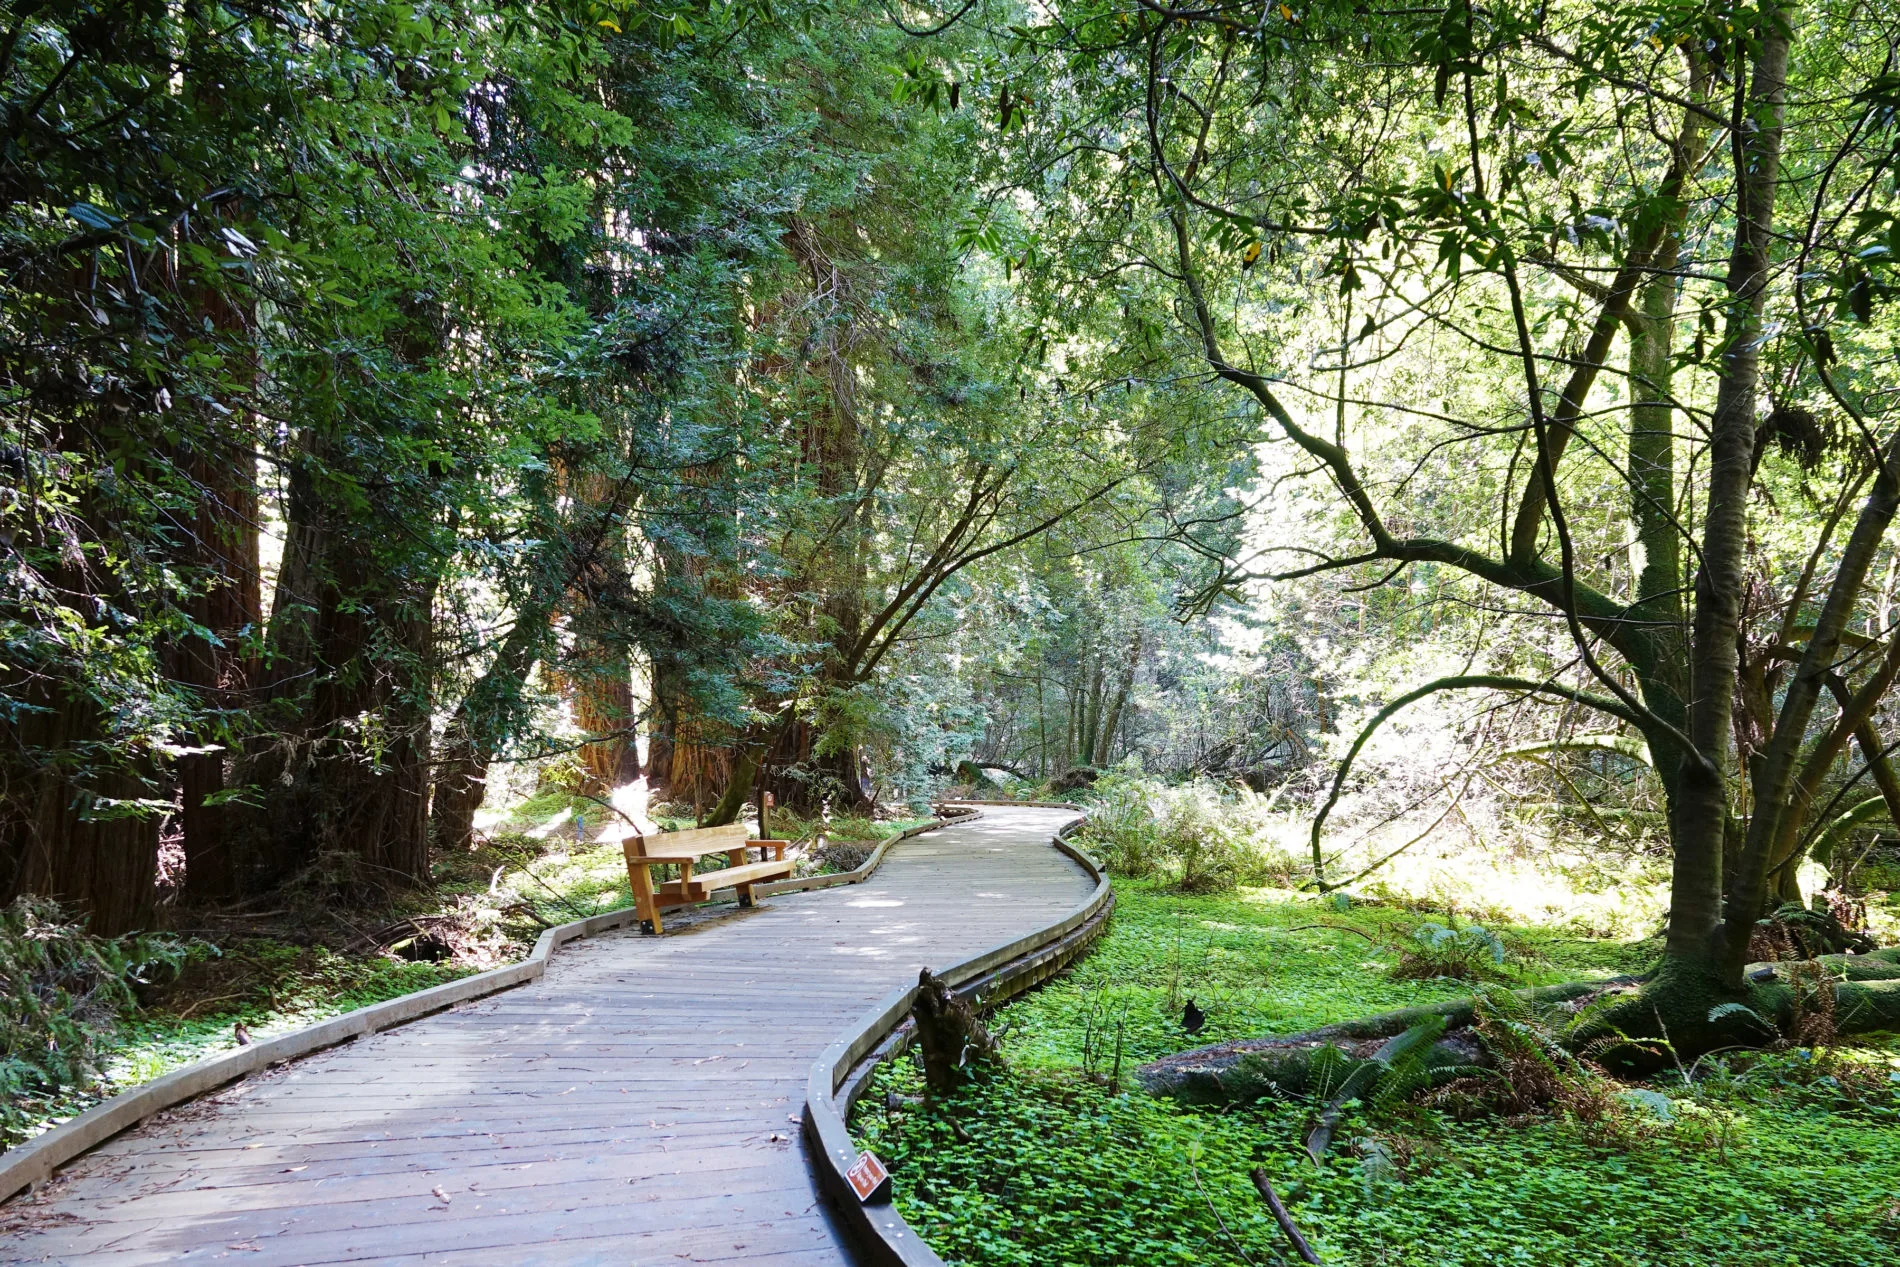 A comfortable bench along the winding boardwalk in Muir Woods.